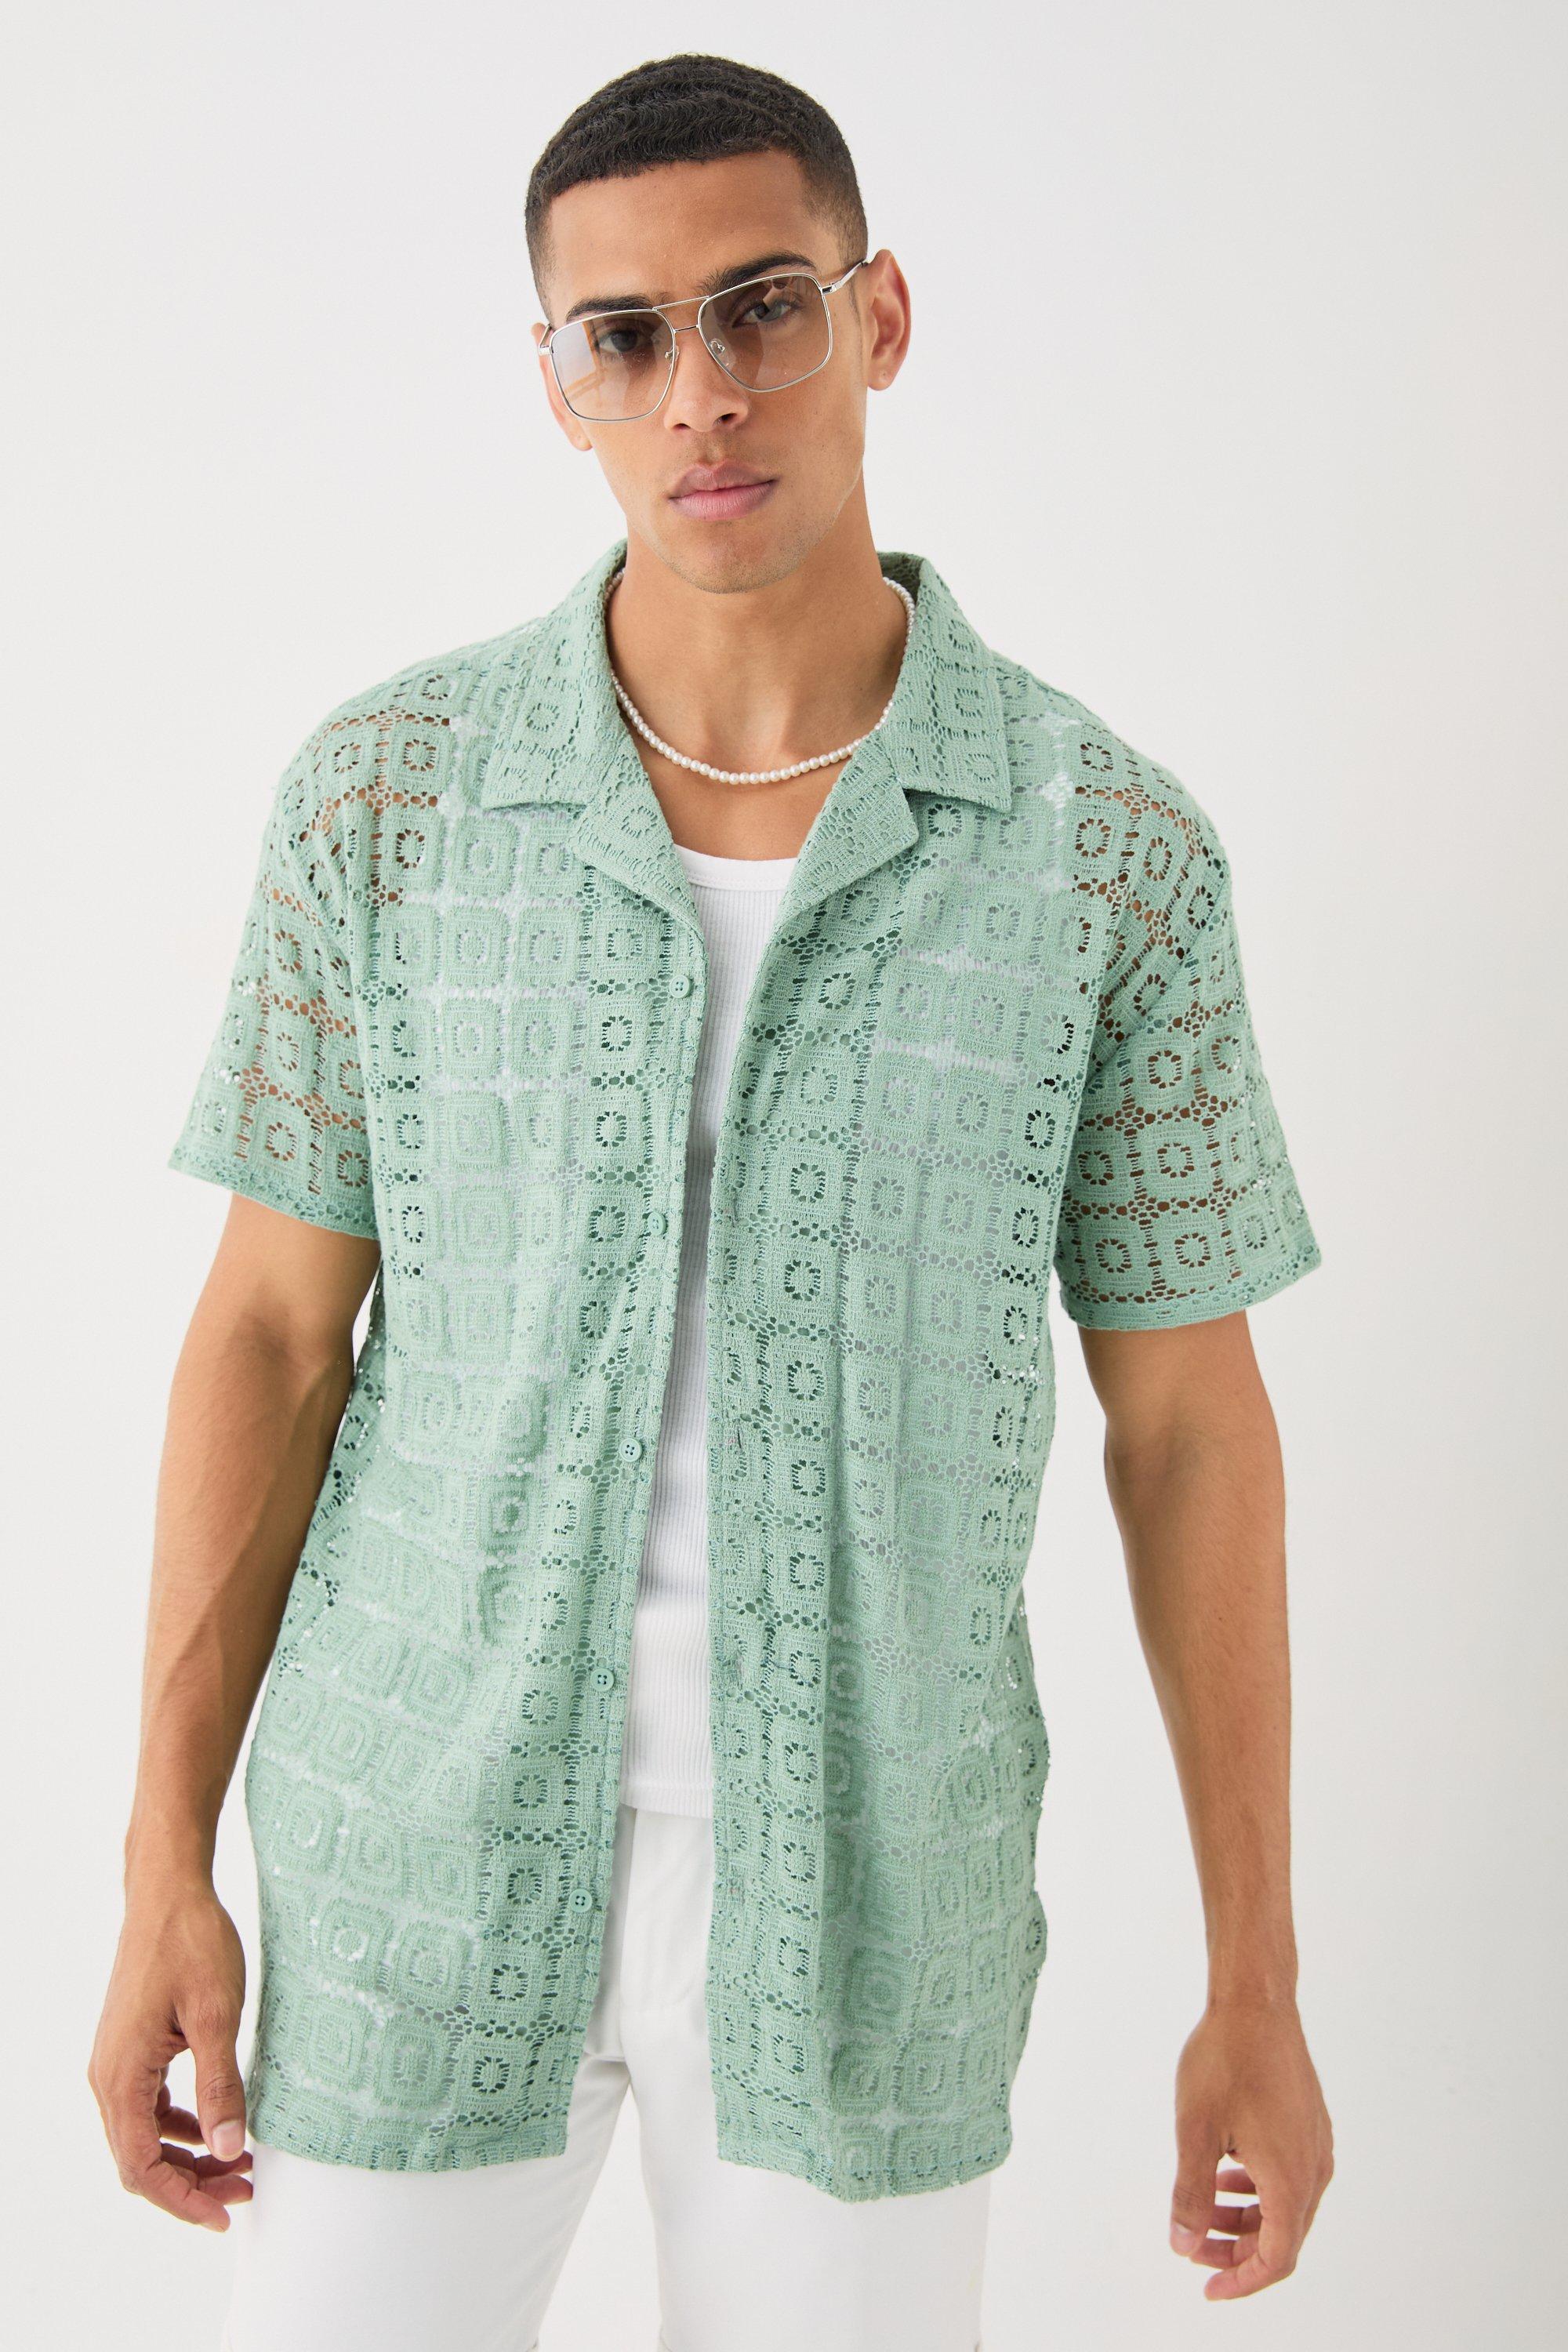 Image of Oversized Open Weave Lace Shirt, Verde